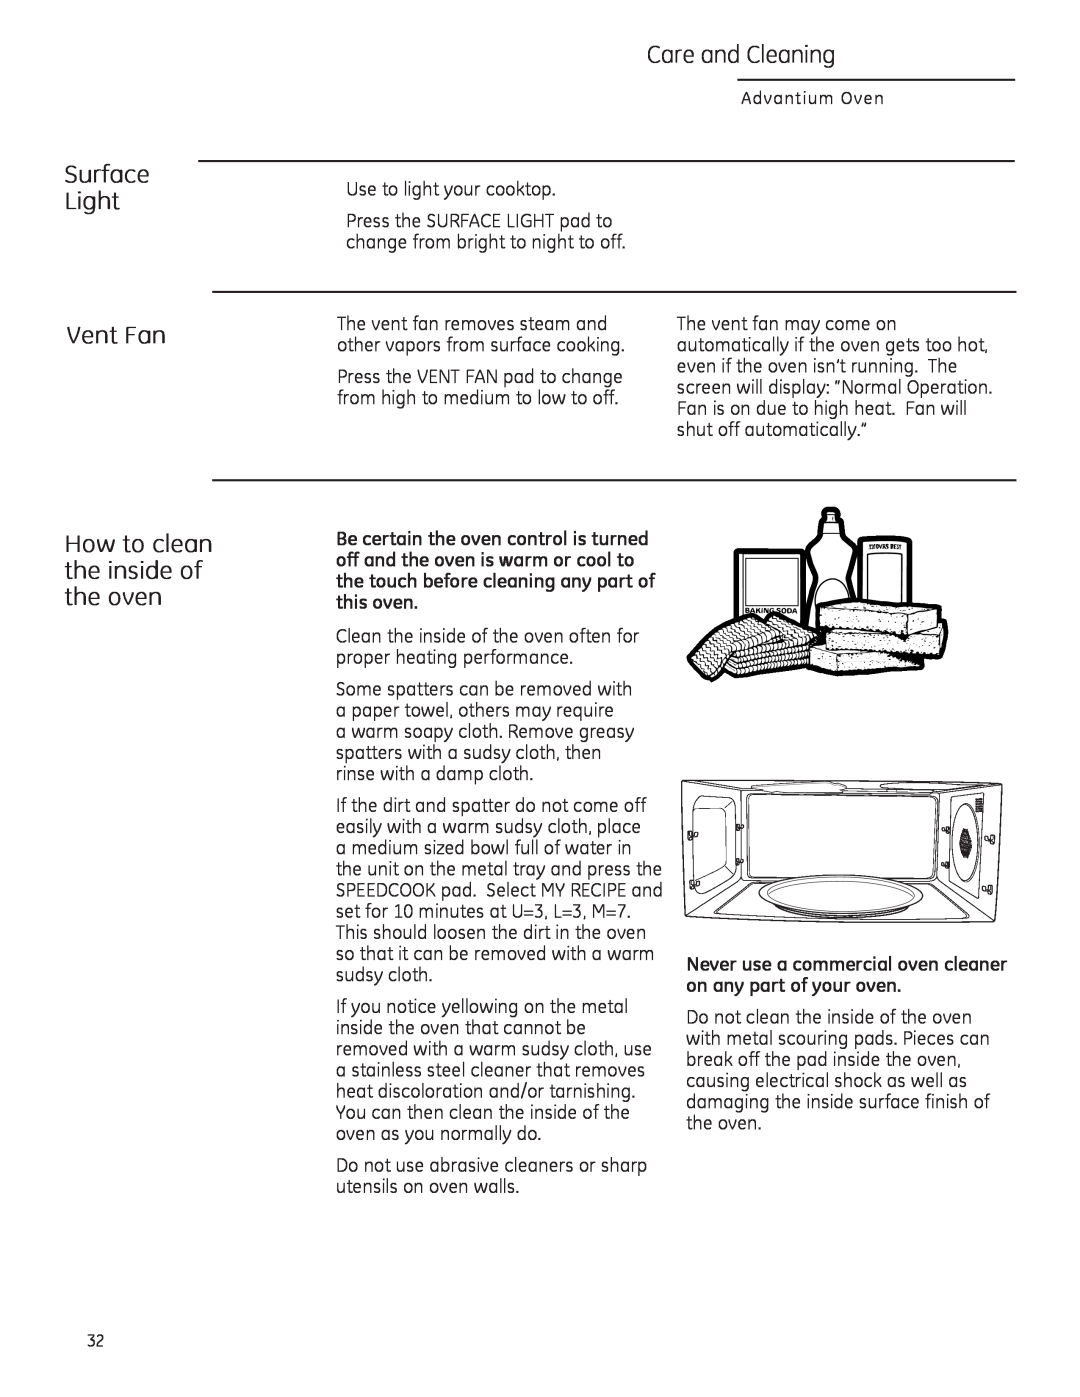 GE CSA1201, PSA1200, PSA1201 owner manual Surface Light Vent Fan, Care and Cleaning, How to clean the inside of the oven 